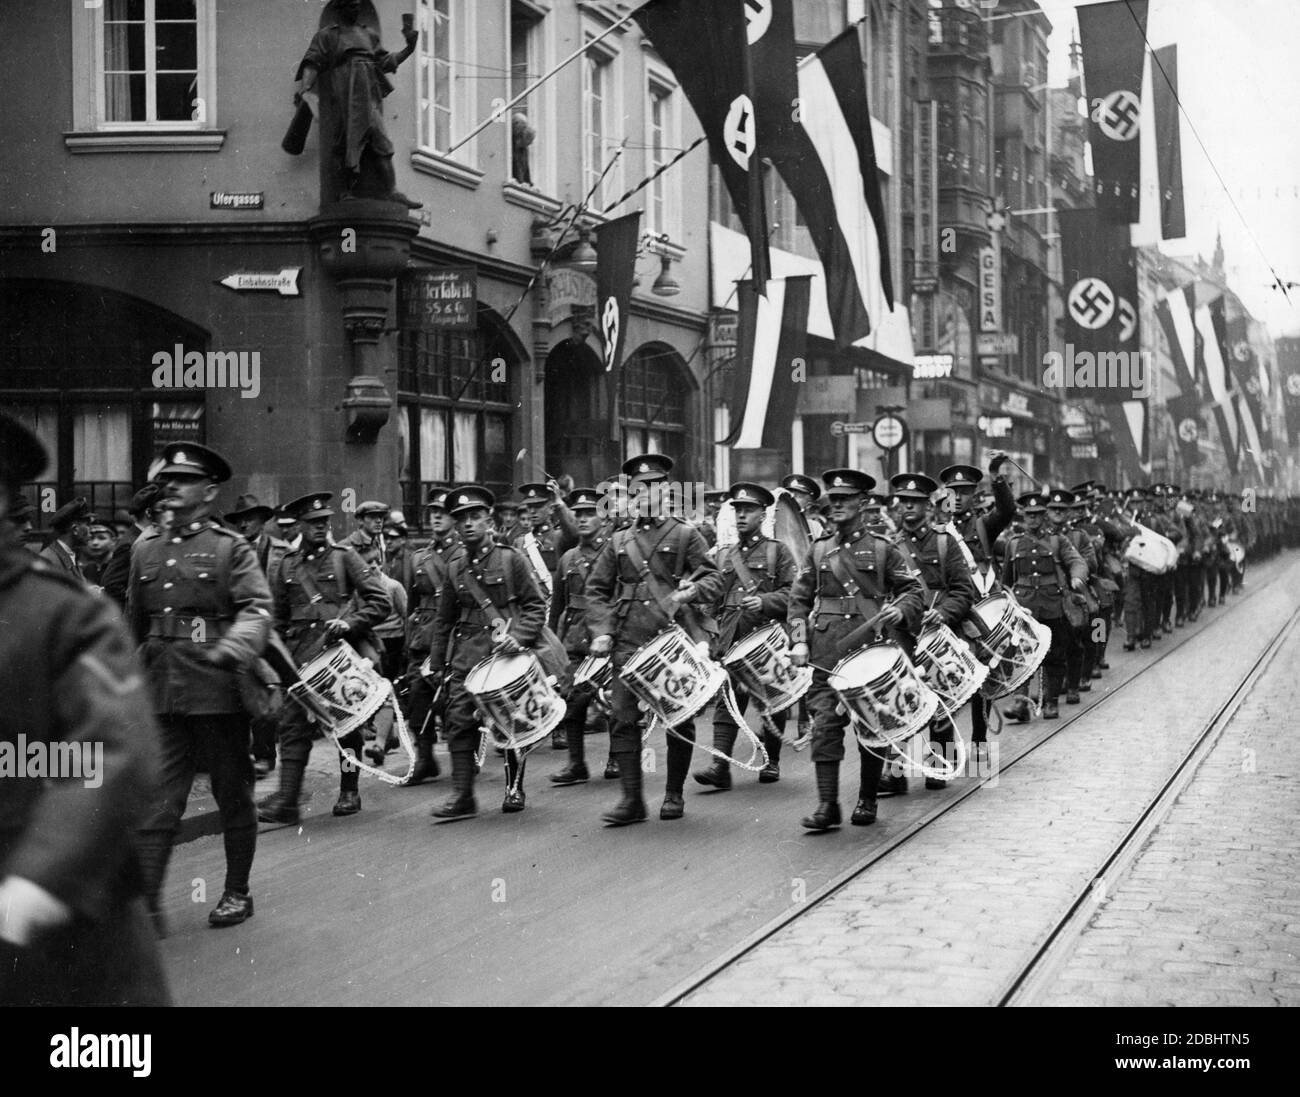 View of a British contingent of the International Force for the Protection of the Saar Referendum in a street decorated with swastika flags and imperial flags in Saarbruecken. Stock Photo